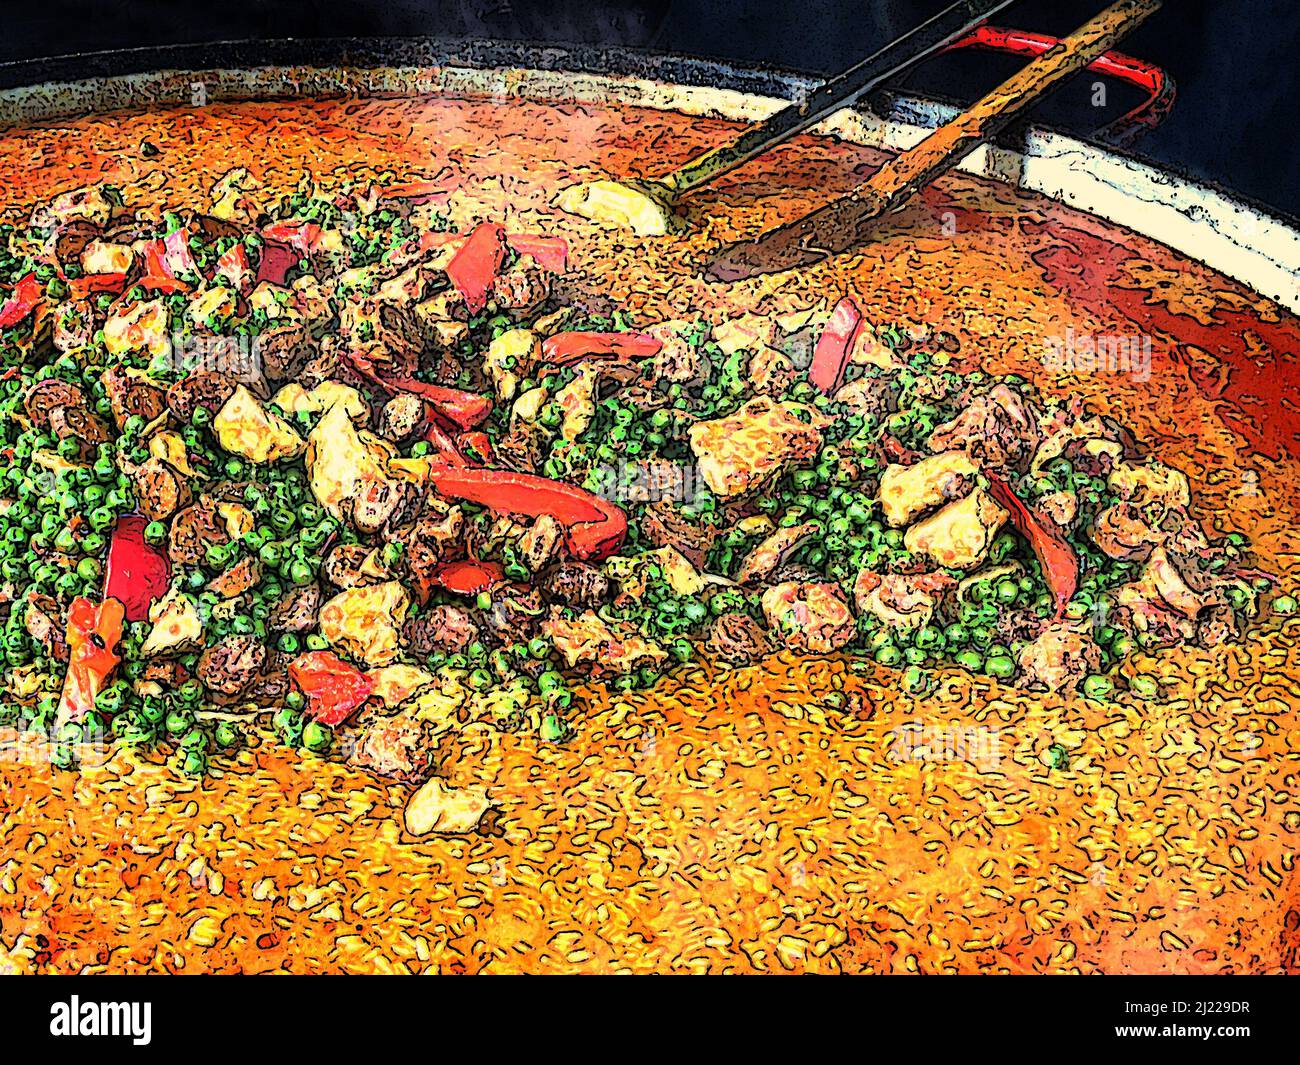 Digital multi-media art illustration of a giant paella pan of the type used for large scale catering, events, festivals, outdoor street food markets Stock Photo